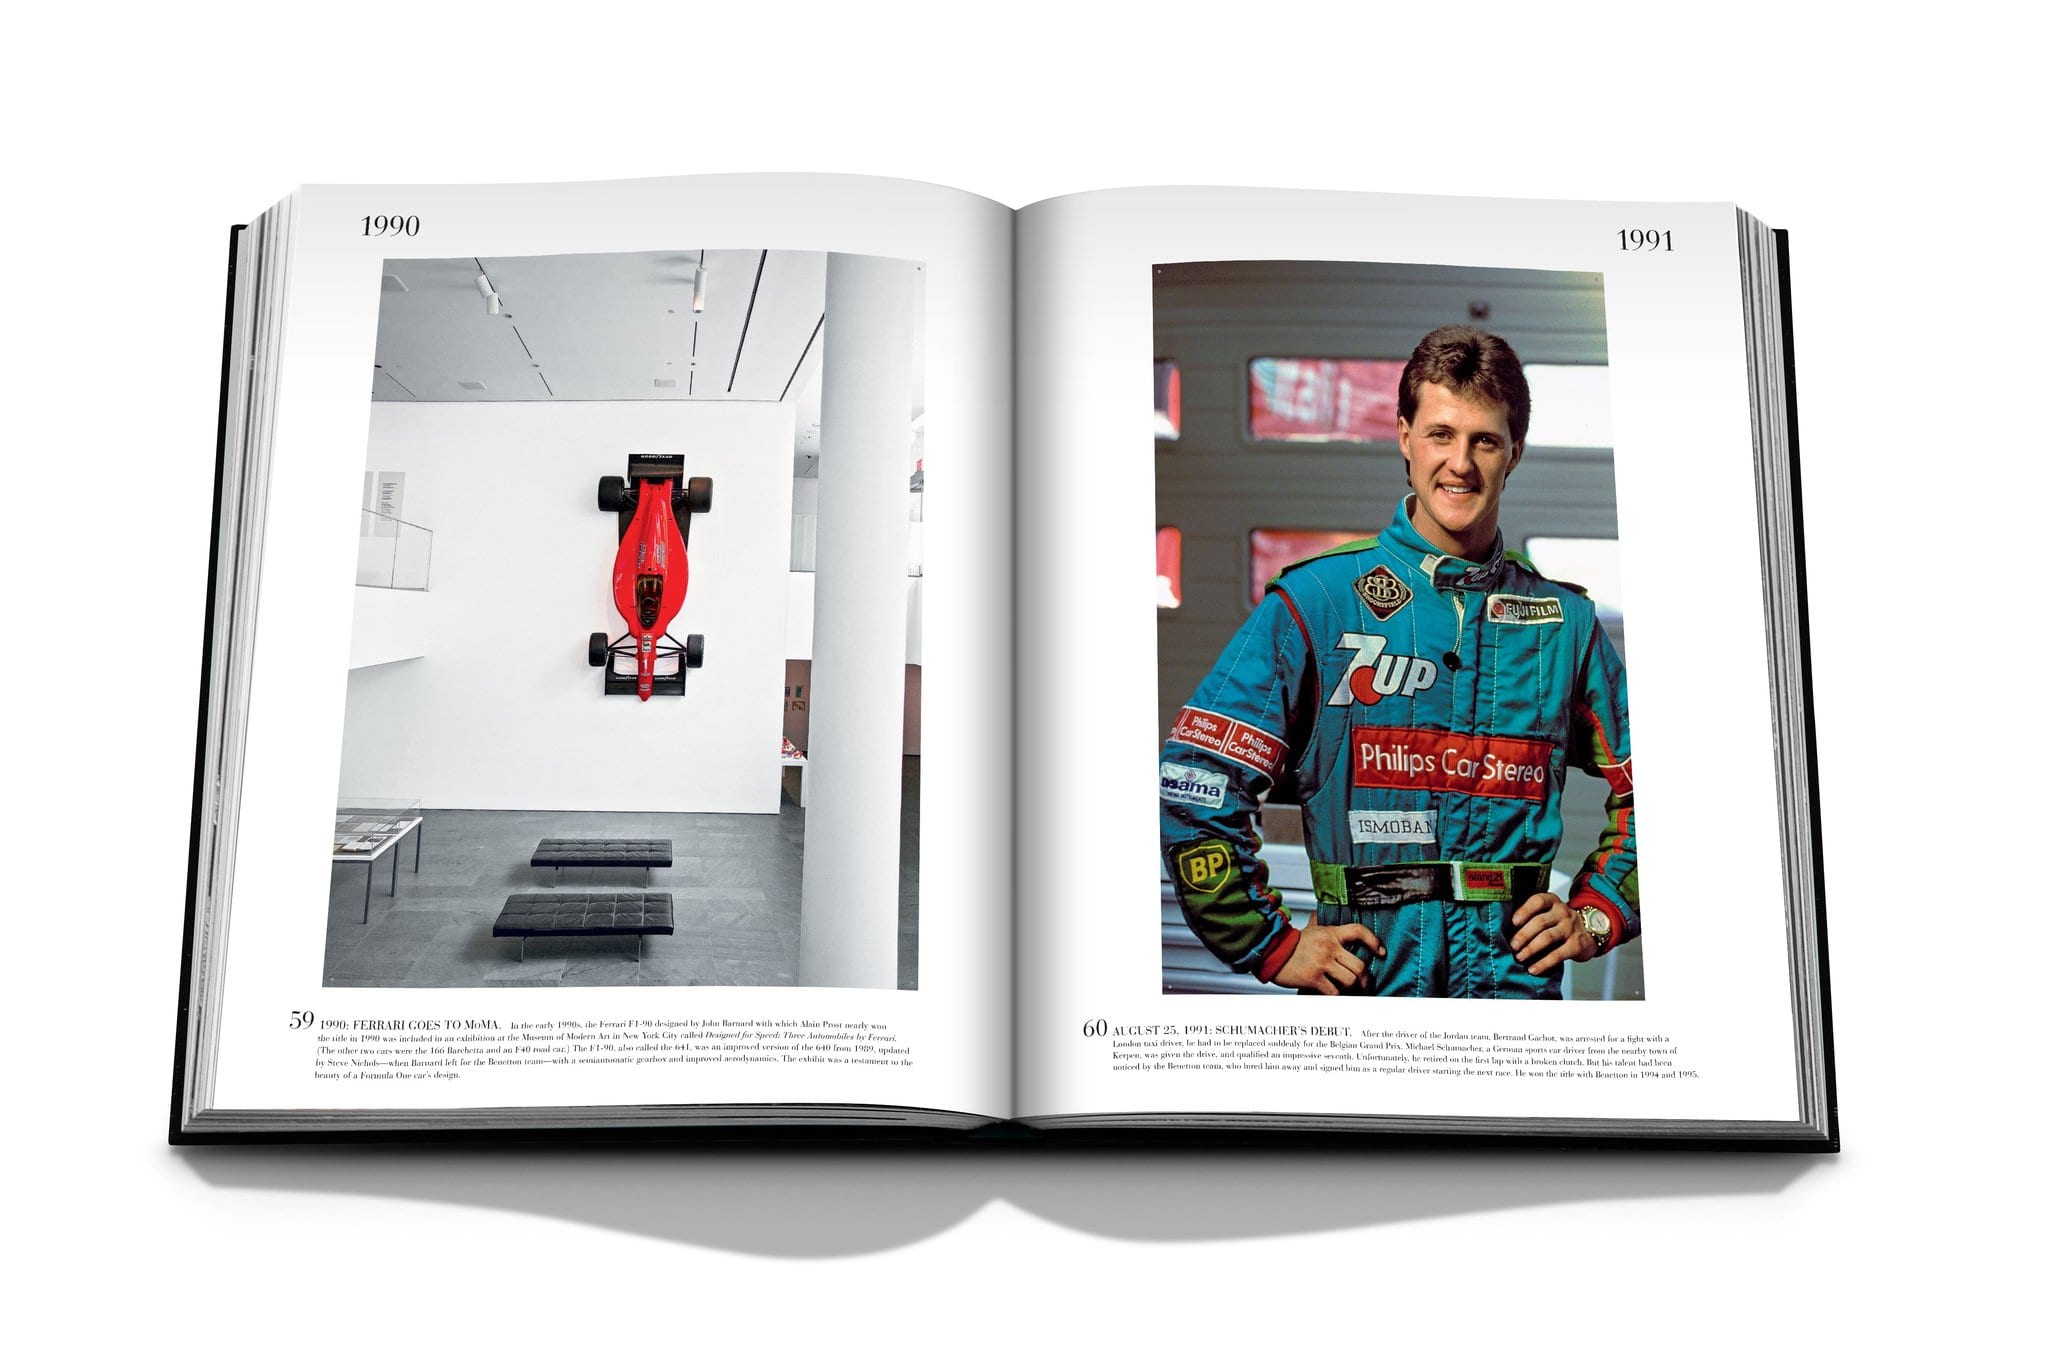 Assouline The Impossible Collection: Formel 1